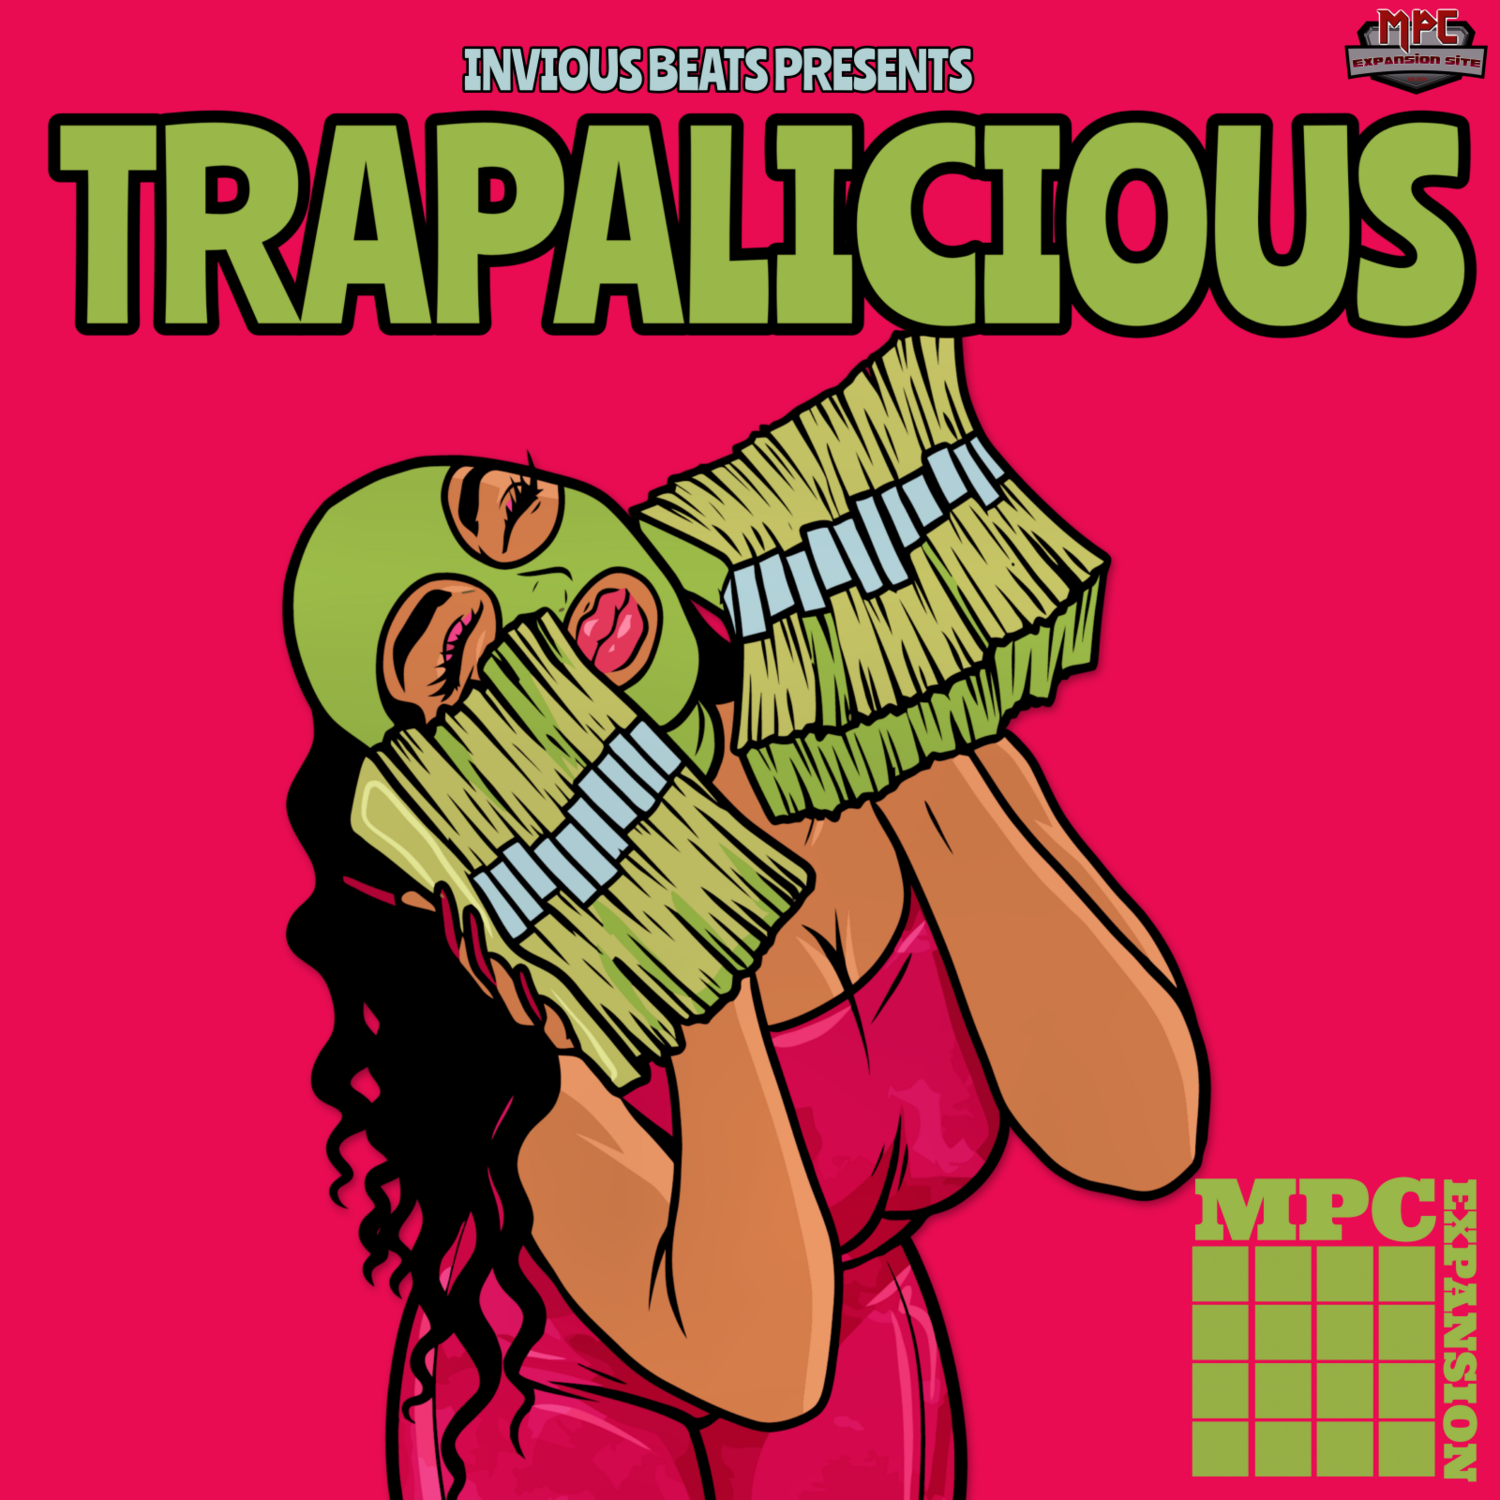 MPC EXPANSION 'TRAPALICIOUS' by INVIOUS